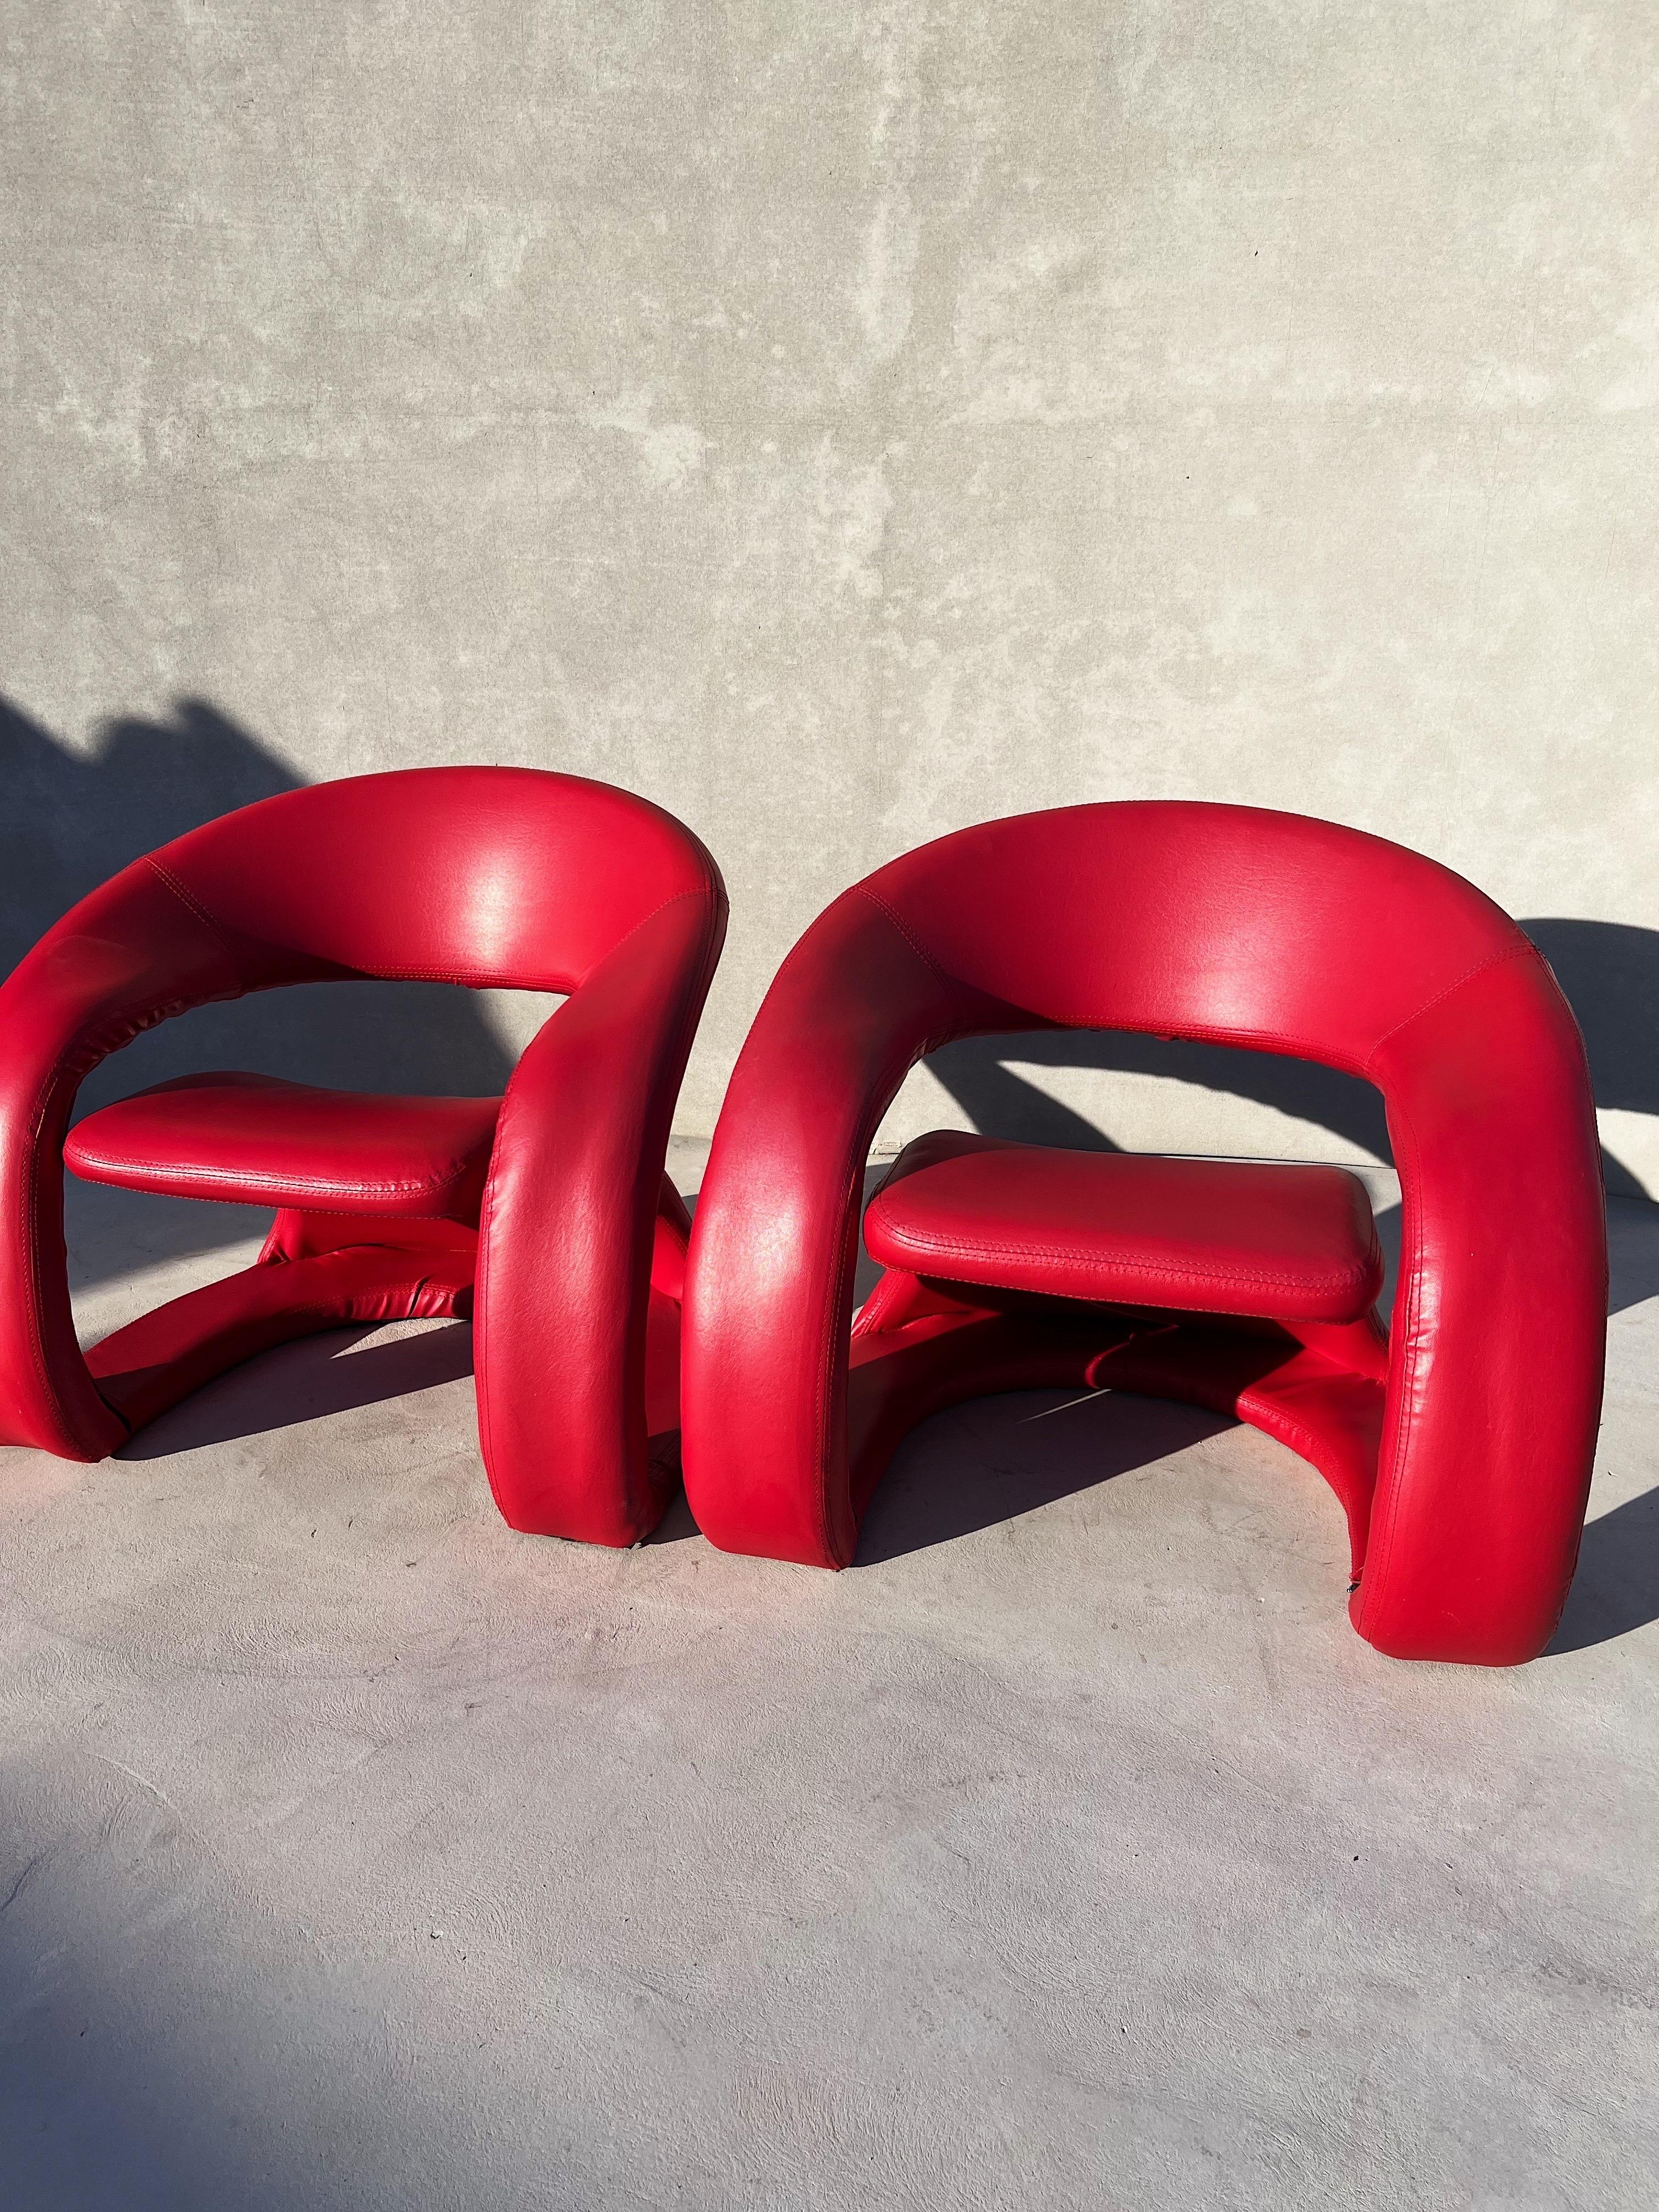 Post-Modern Vintage Pair of Sculptural Chairs in Electric Red, Attributed to Jaymar